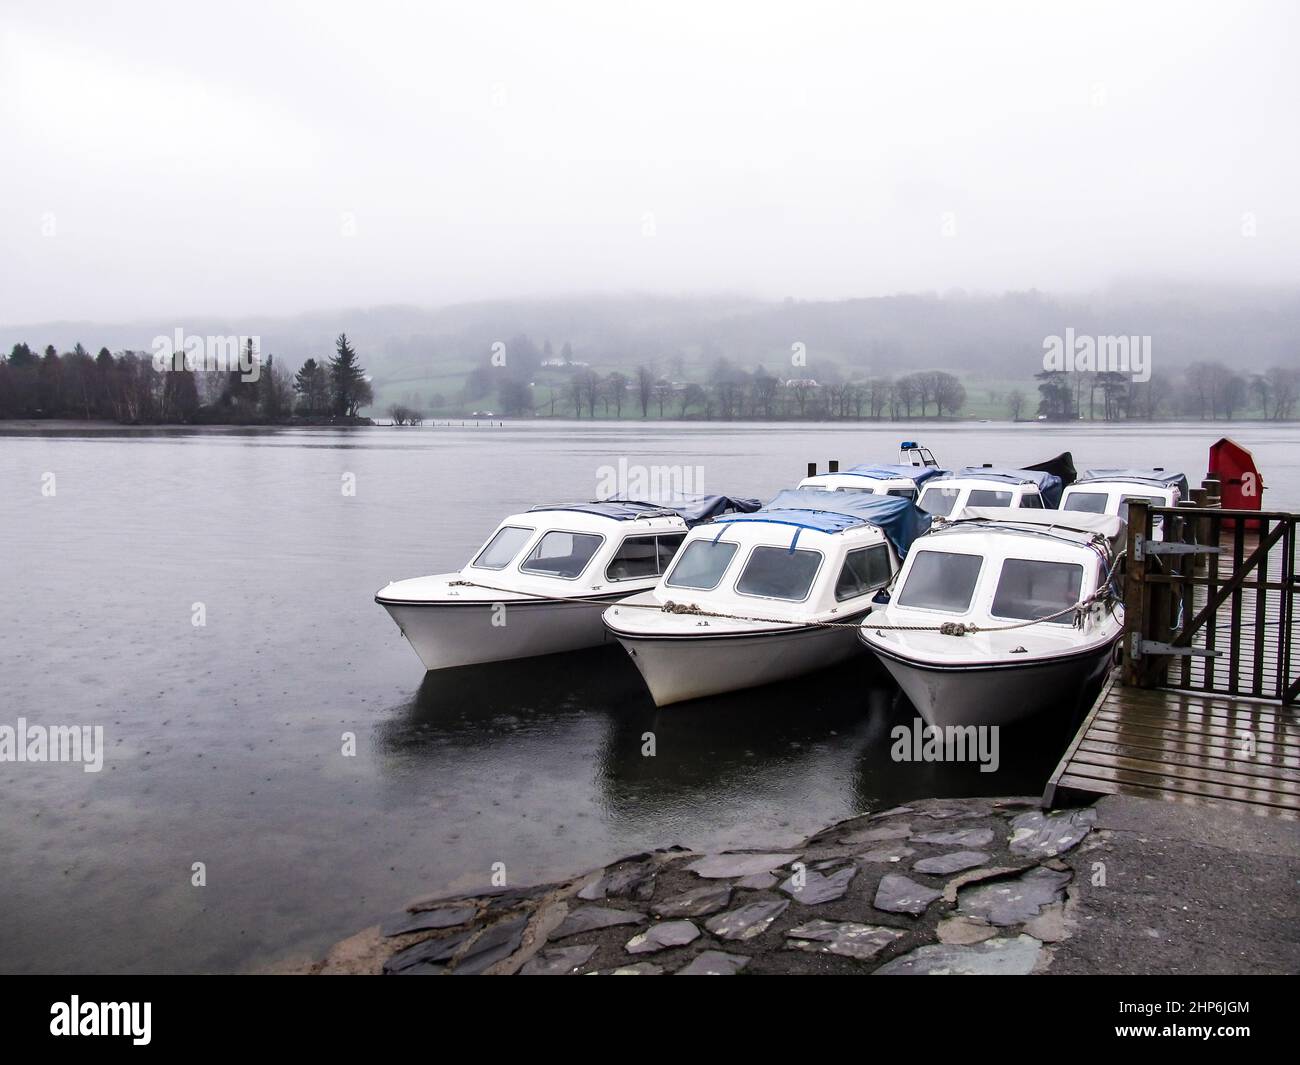 Moored Motorboats on Coniston Water, UK, on a misty and Rainy day Stock Photo